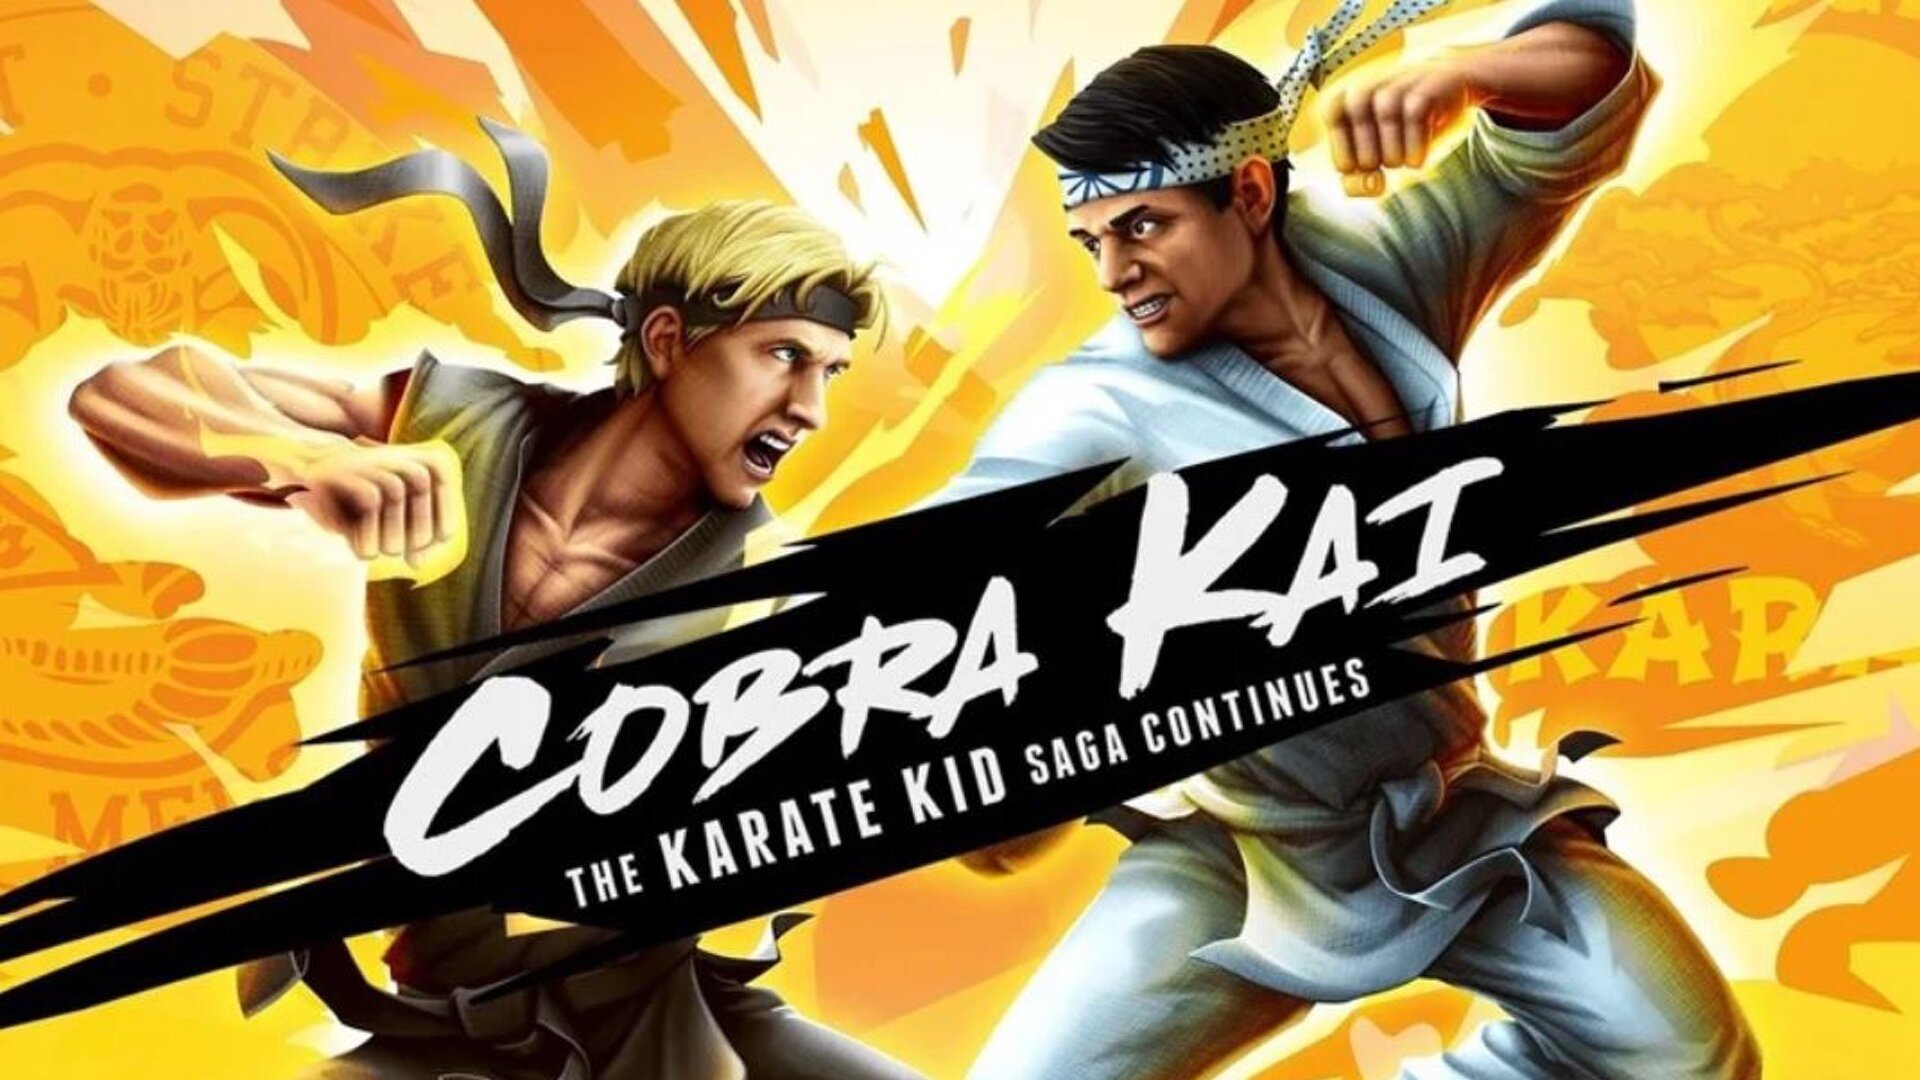 So Cobra Kai Is Getting A Video Game And A Trailer Just Dropped